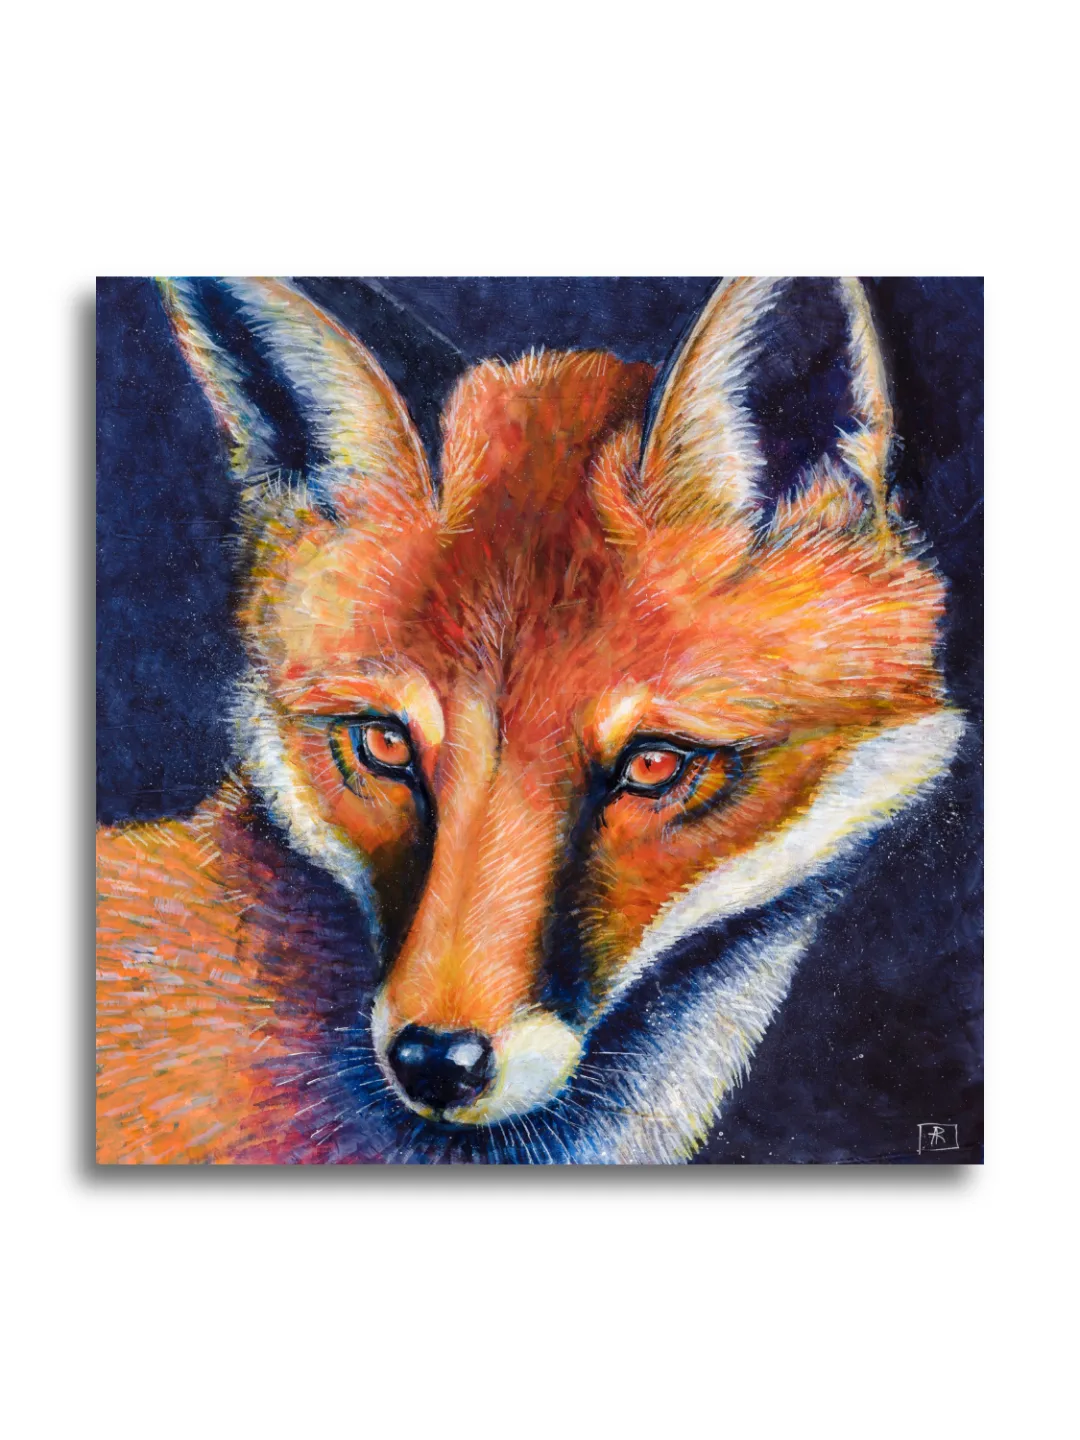 Renard by Ann Richmond - A Painting of a staring Red Fox. Limited inventory remains in our Print Sale...